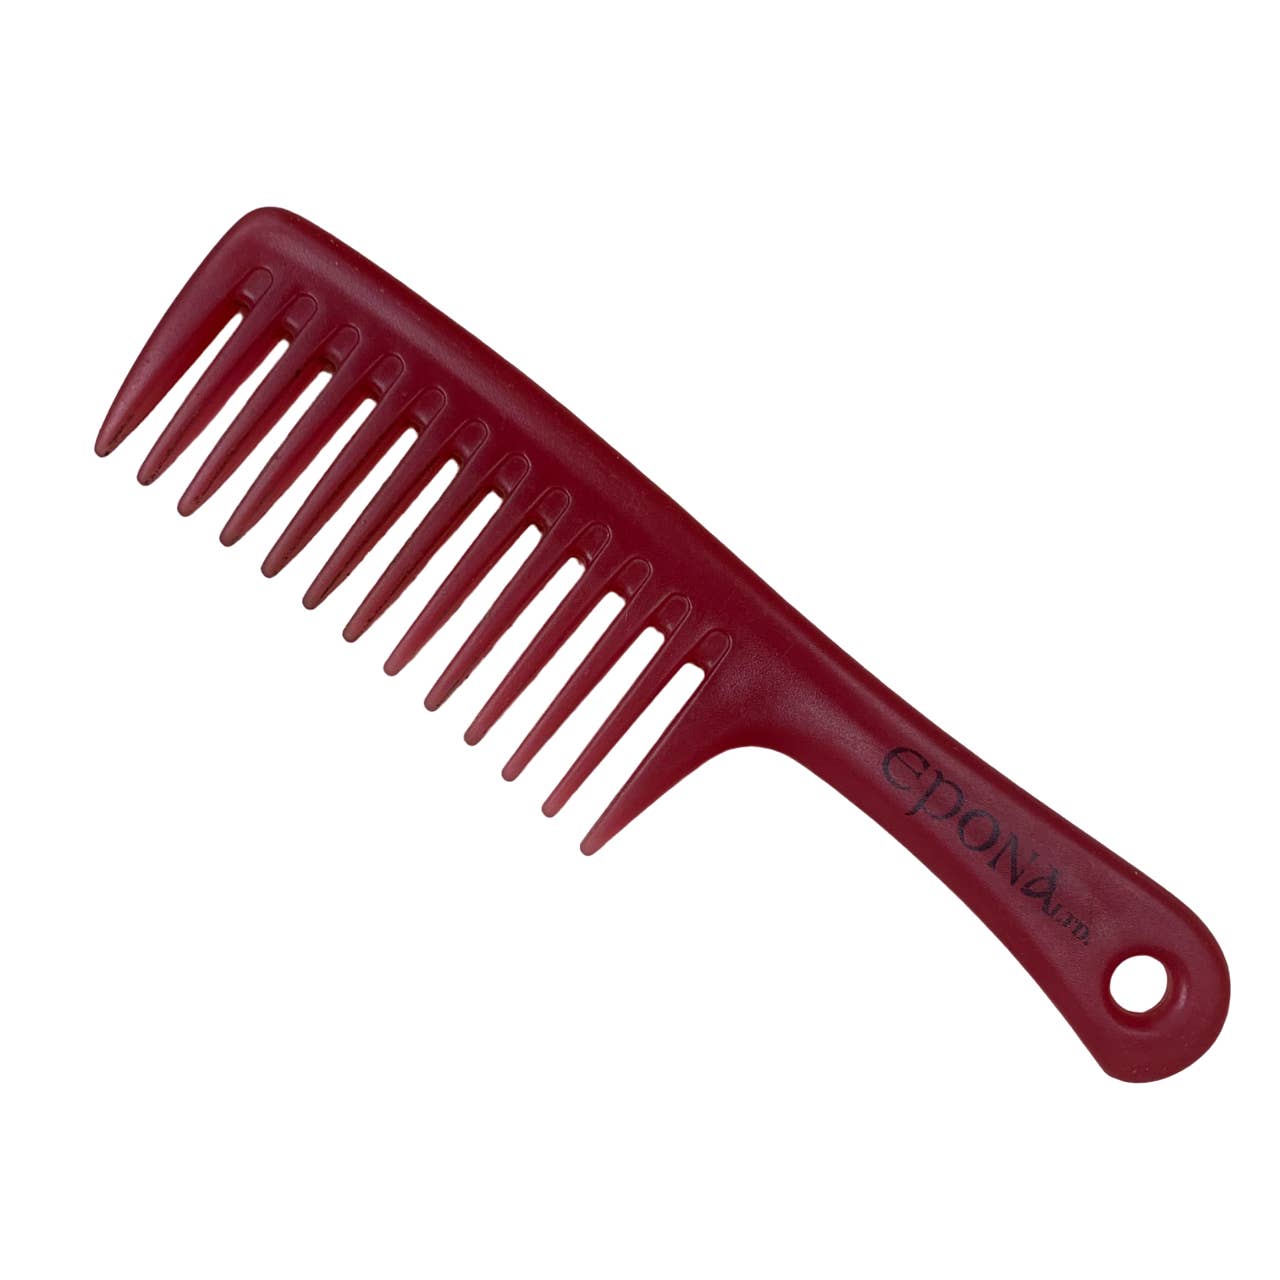 Epona Ponytail Comb in Red